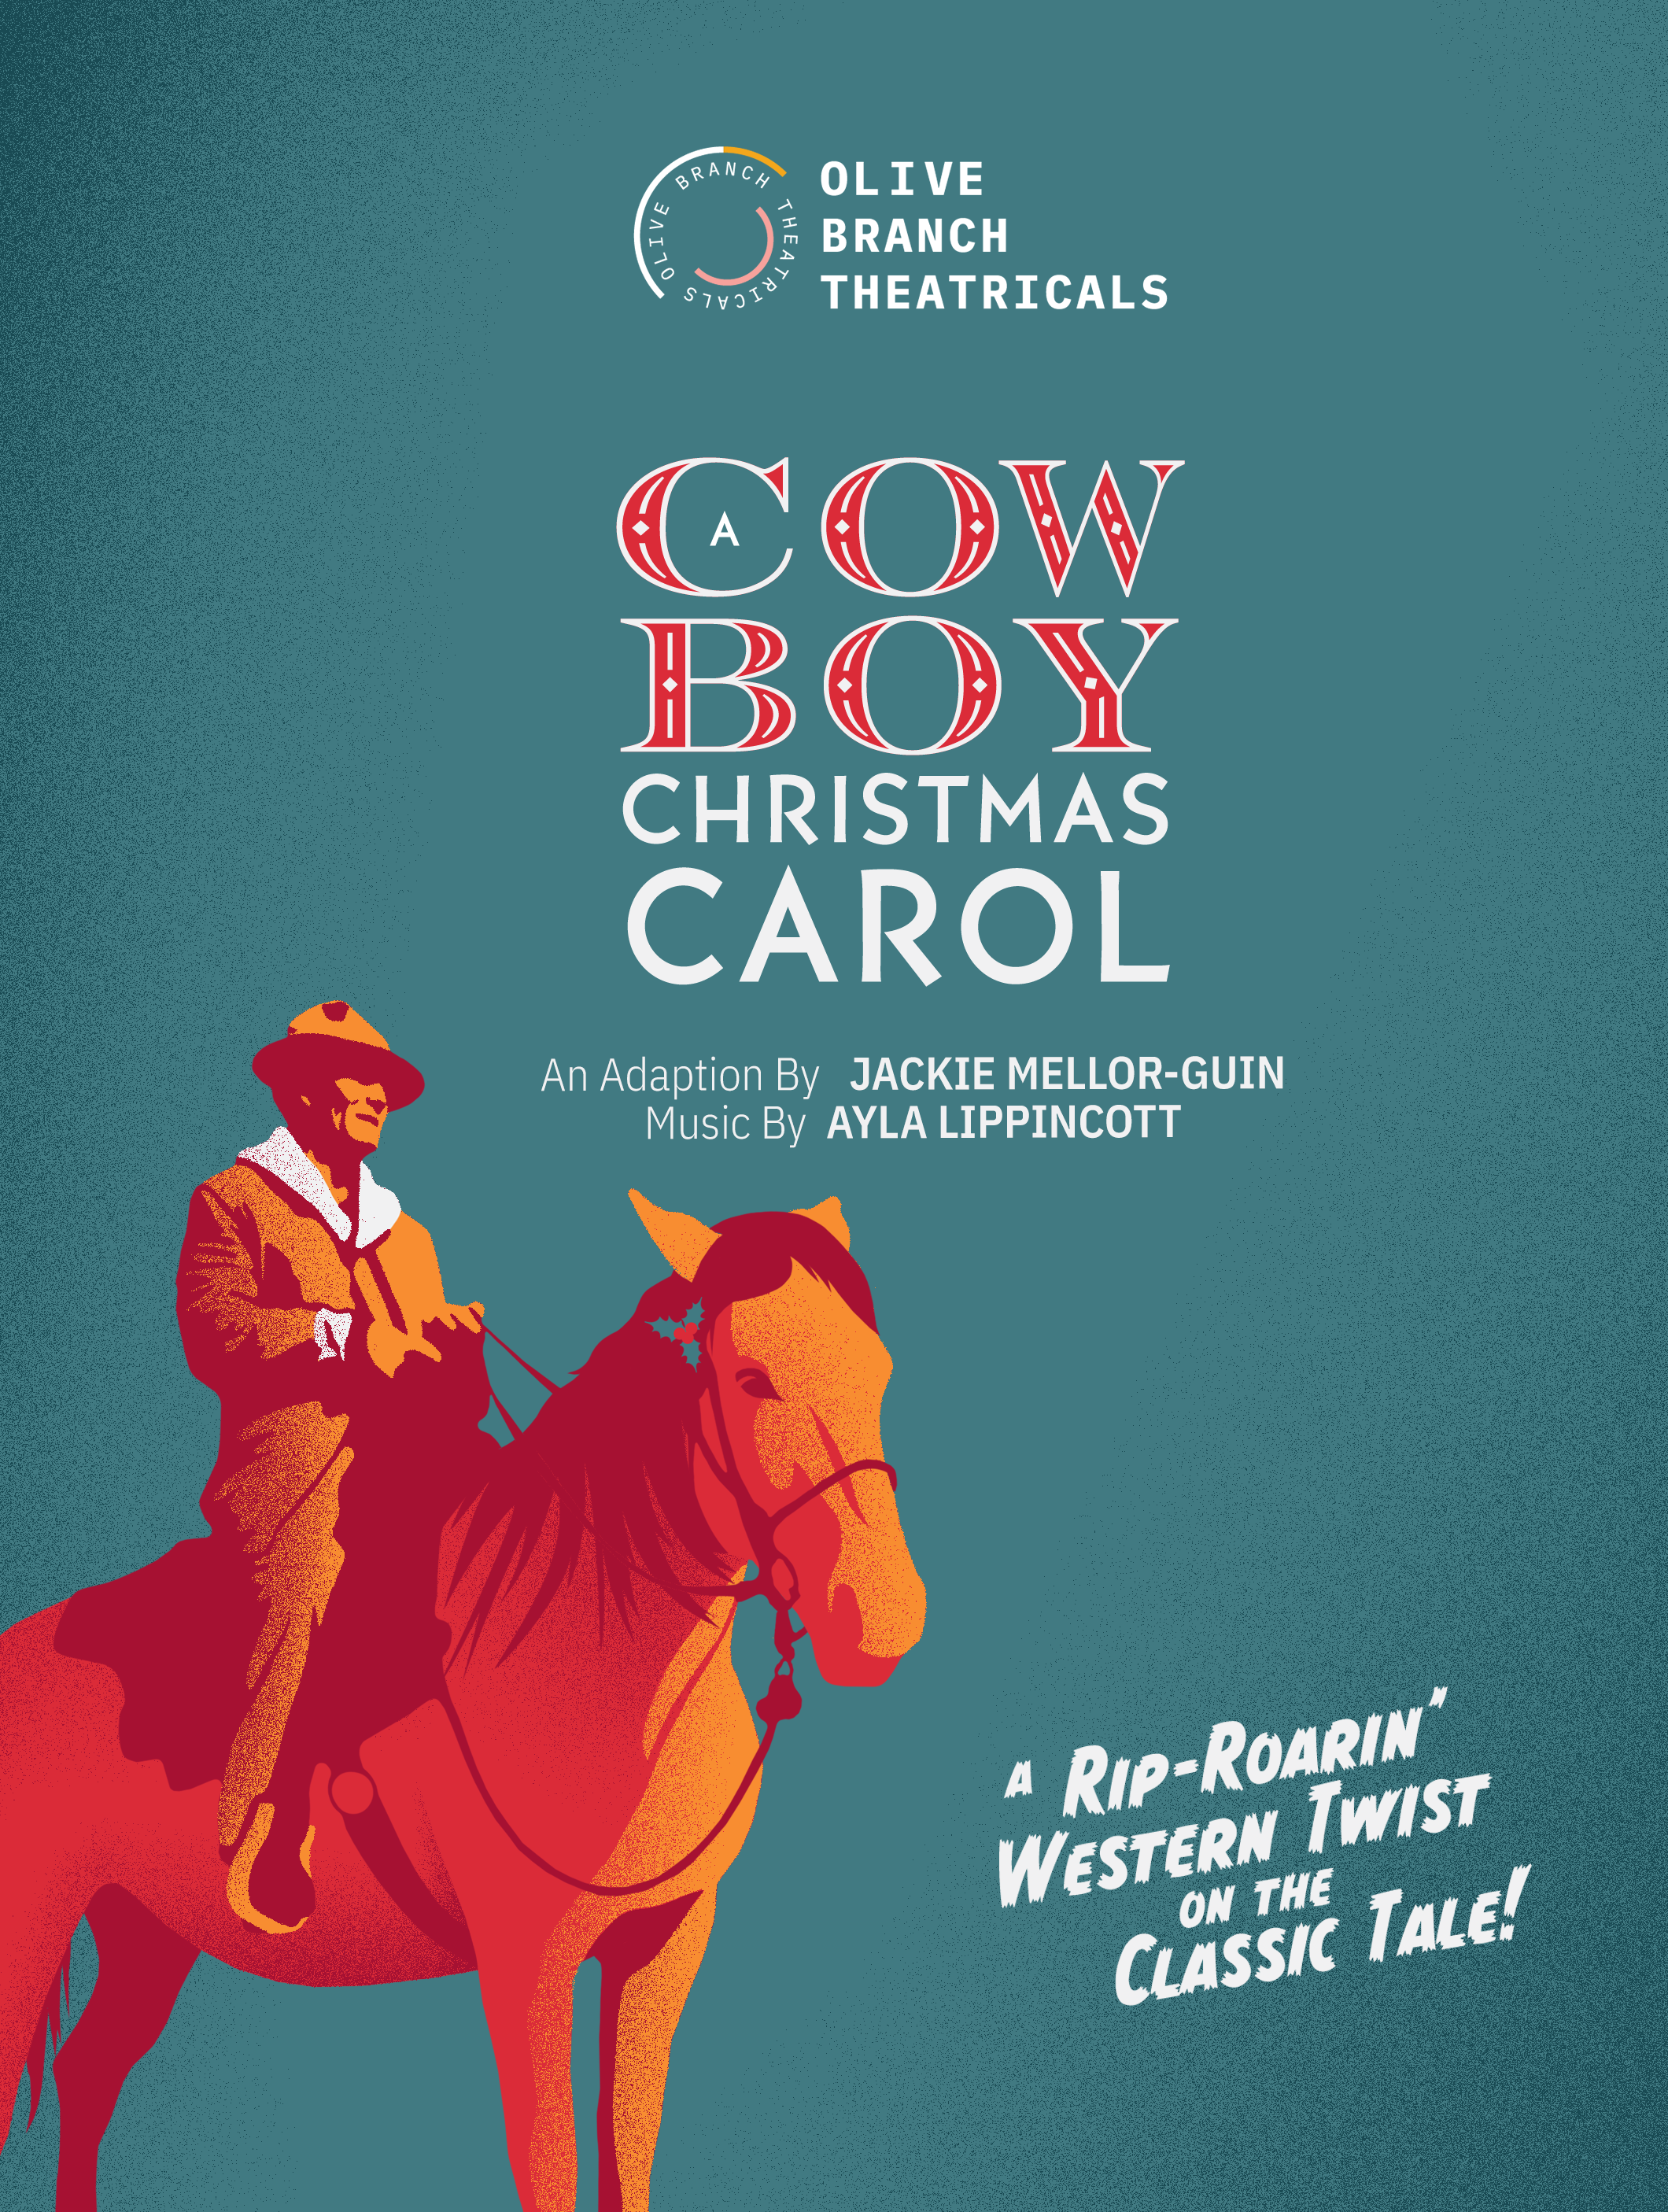 Cowboy Christmas Carol at Olive Branch Theatricals - Performances December 13, 2019 to December ...